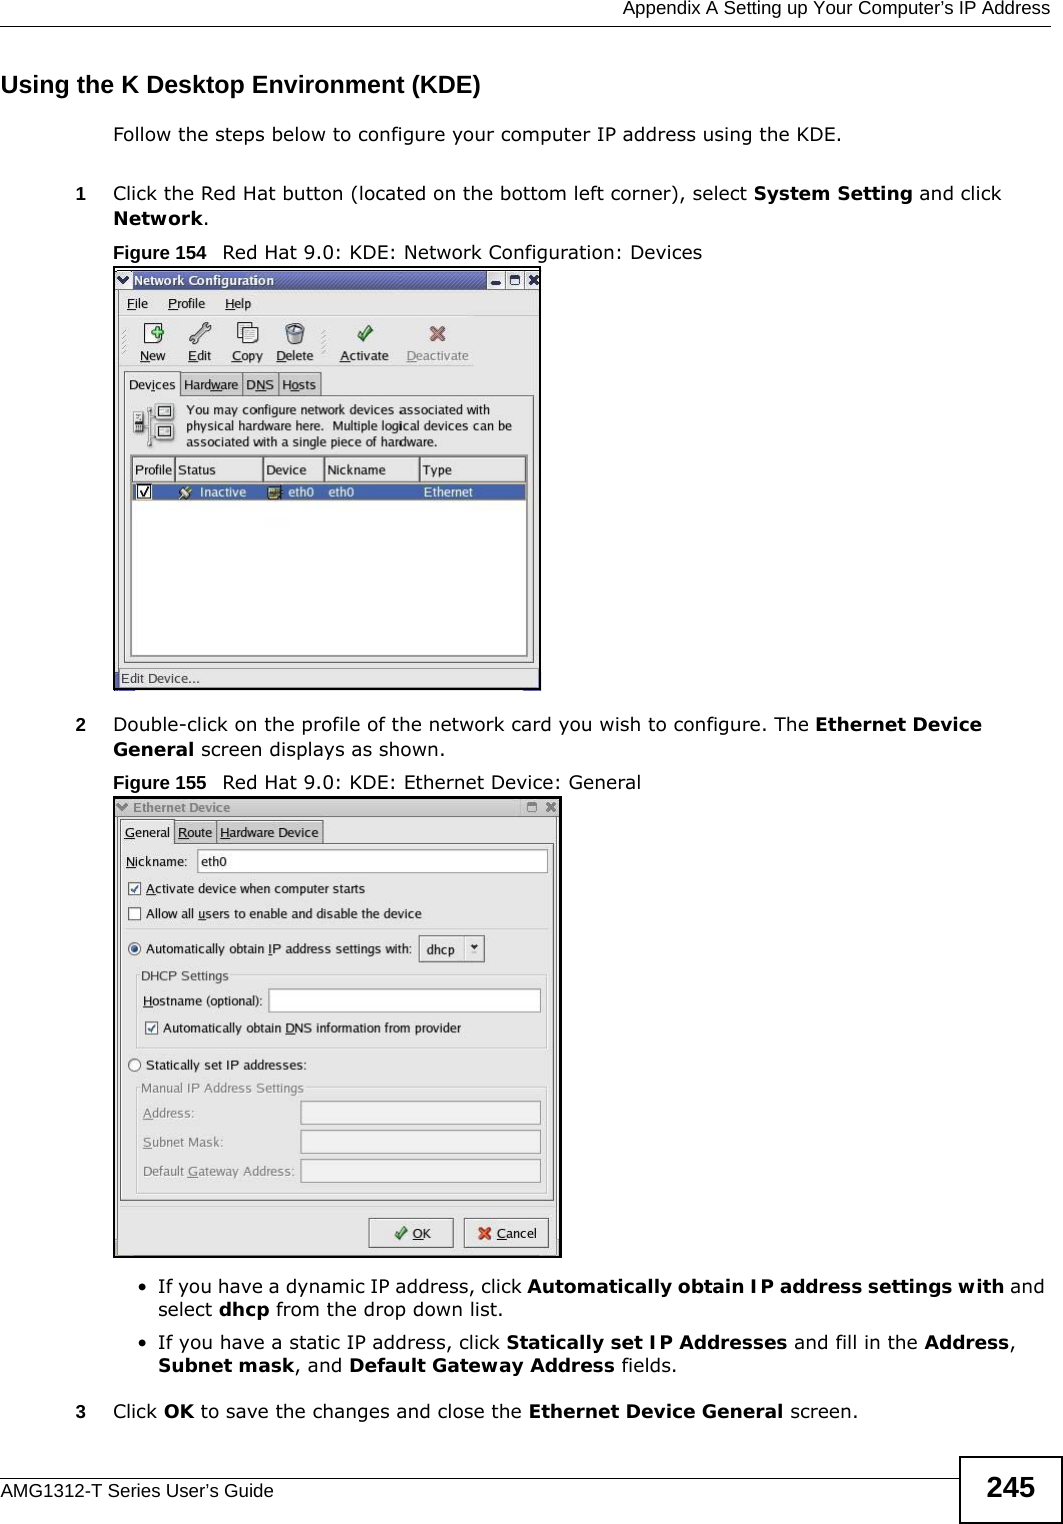  Appendix A Setting up Your Computer’s IP AddressAMG1312-T Series User’s Guide 245Using the K Desktop Environment (KDE)Follow the steps below to configure your computer IP address using the KDE. 1Click the Red Hat button (located on the bottom left corner), select System Setting and click Network.Figure 154   Red Hat 9.0: KDE: Network Configuration: Devices 2Double-click on the profile of the network card you wish to configure. The Ethernet Device General screen displays as shown. Figure 155   Red Hat 9.0: KDE: Ethernet Device: General  • If you have a dynamic IP address, click Automatically obtain IP address settings with and select dhcp from the drop down list. • If you have a static IP address, click Statically set IP Addresses and fill in the Address, Subnet mask, and Default Gateway Address fields. 3Click OK to save the changes and close the Ethernet Device General screen. 